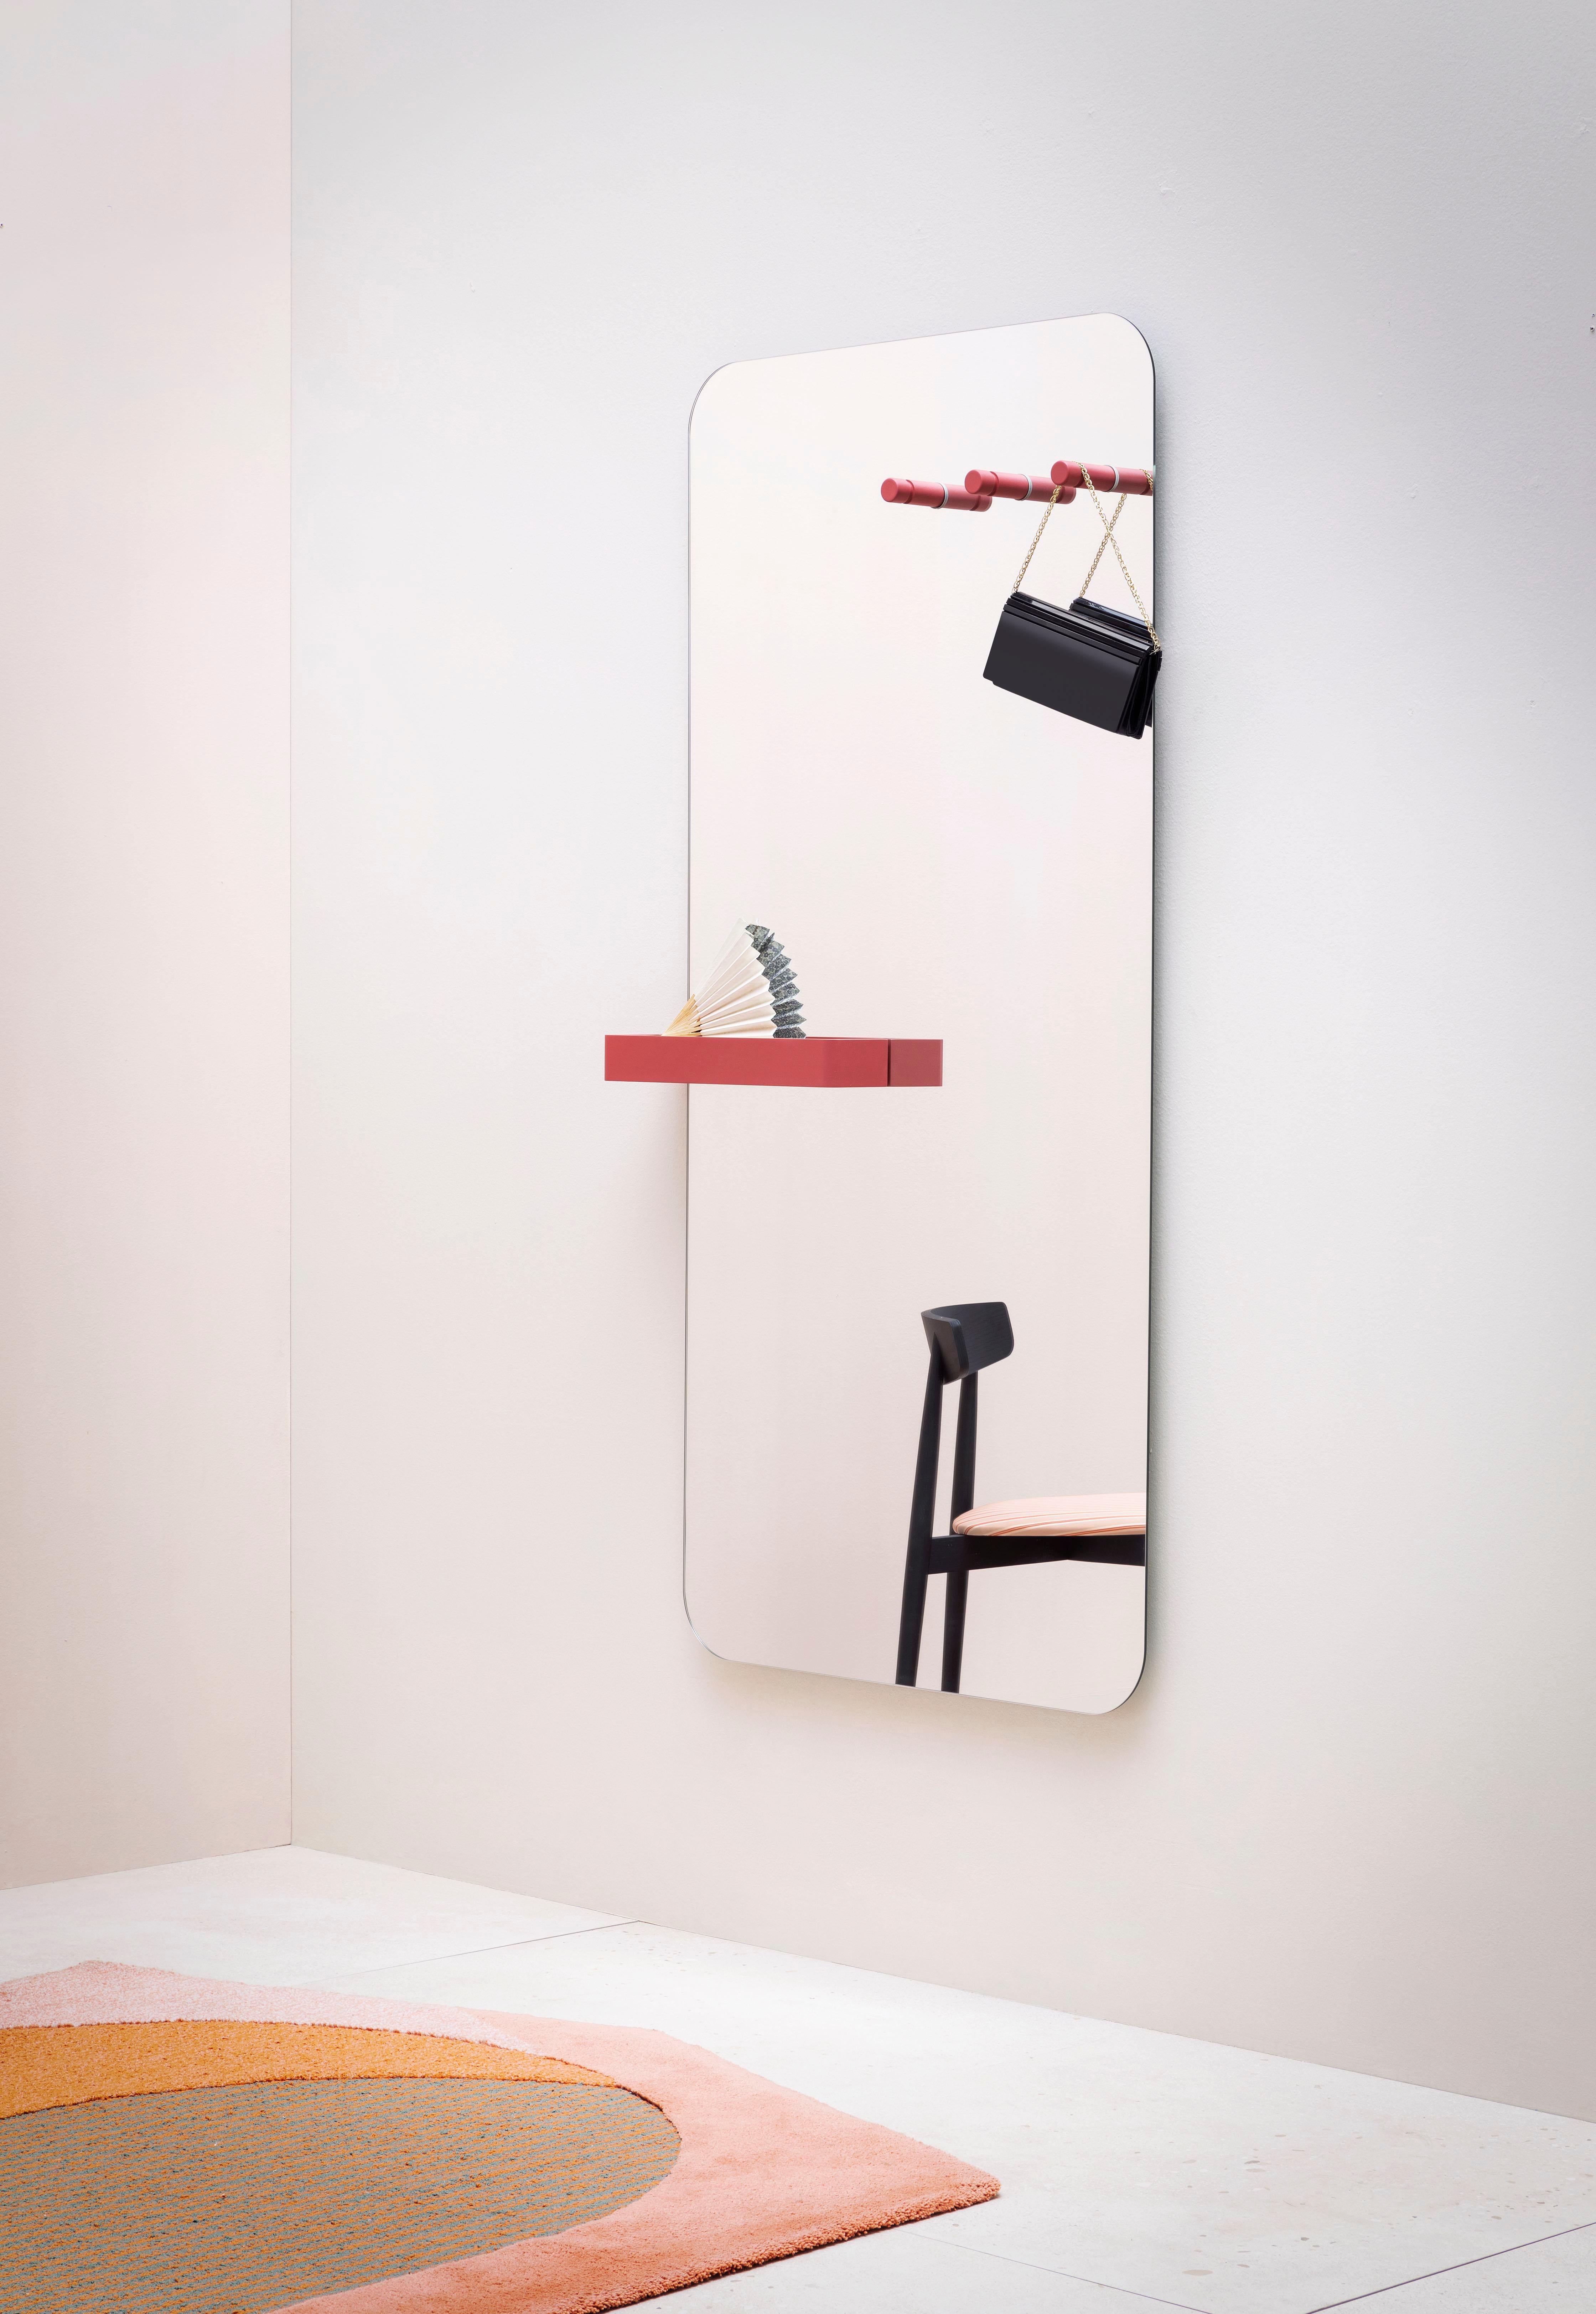 Perfect for solving the entrance hall issue: Benvenuto invites you to leave your keys, hang your coat, making the mirror a multi-functional accessory.

Mirror hangers particularly suitable for lobby, with pegs and lacquered pocket.

Born in 1980